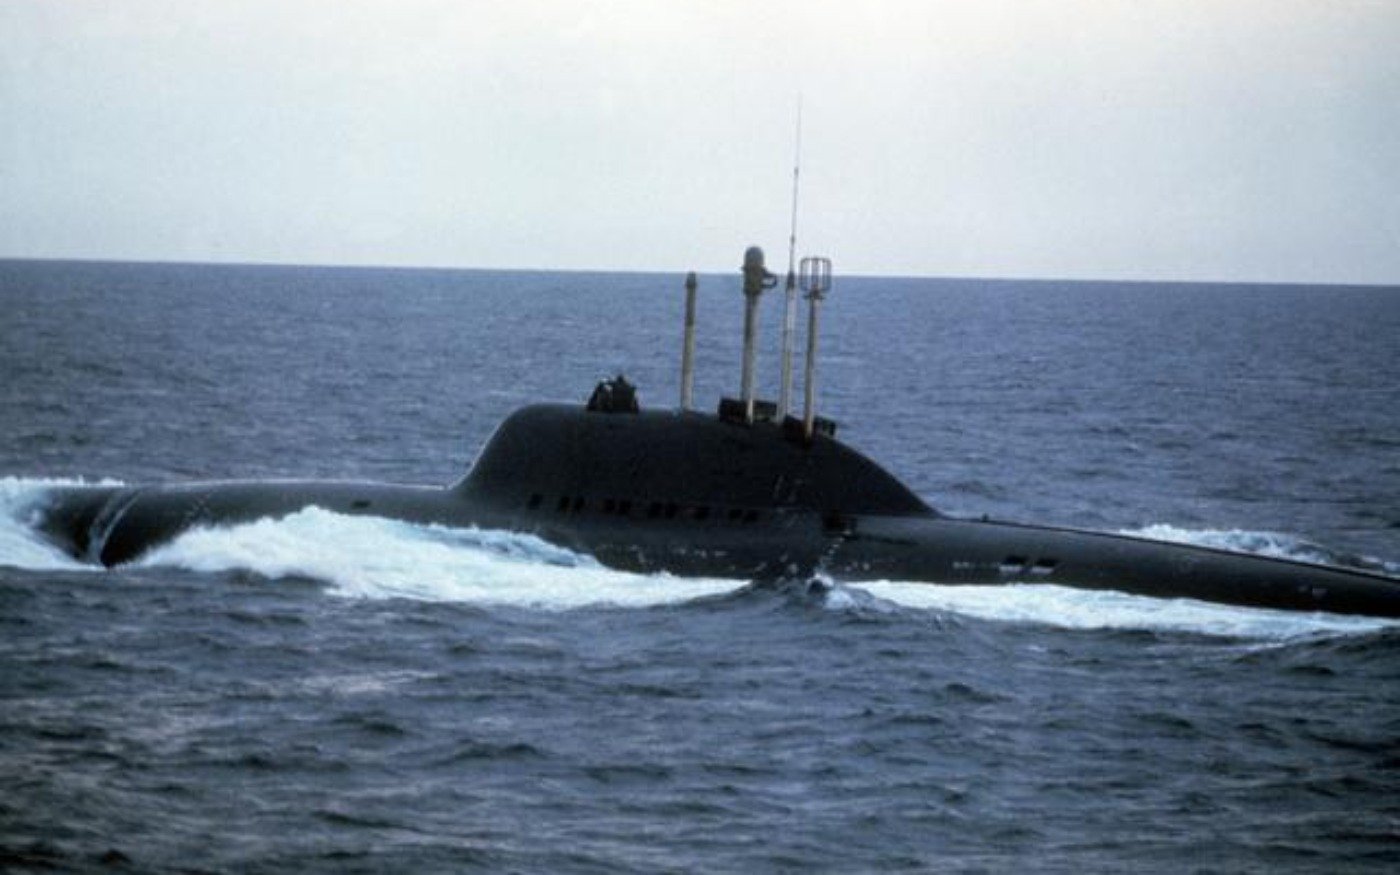 Russia's Alfa-Class Submarine Had 1 Feature the Navy Can't Hope Match